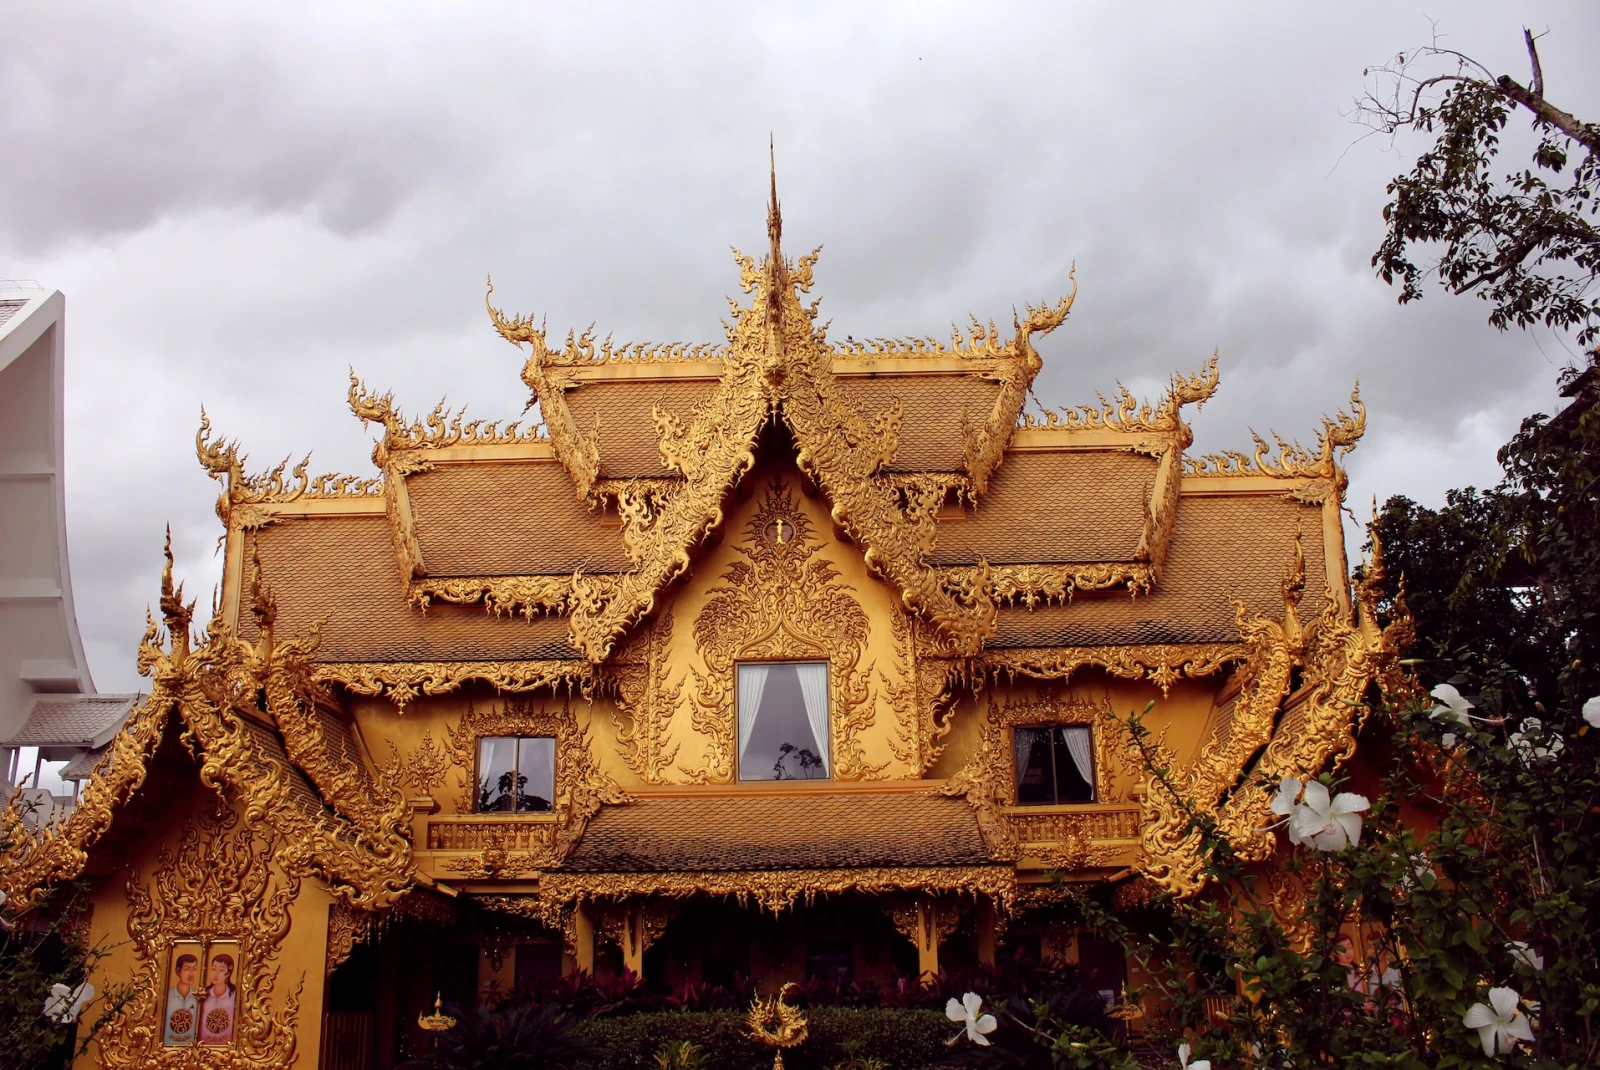 A golden colored temple in Bangkok